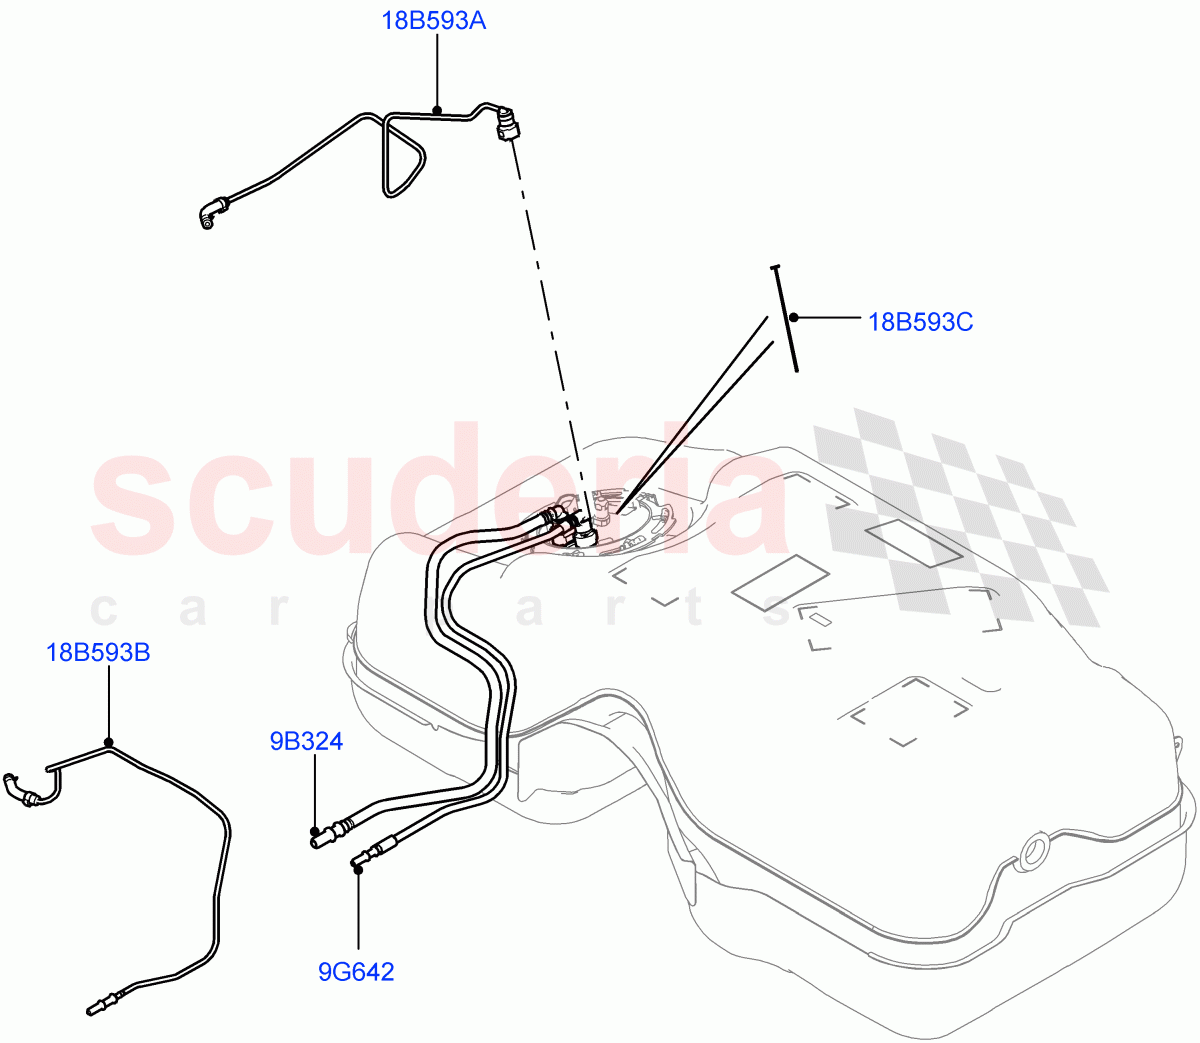 Fuel Lines(Rear)(2.2L CR DI 16V Diesel) of Land Rover Land Rover Discovery Sport (2015+) [2.2 Single Turbo Diesel]